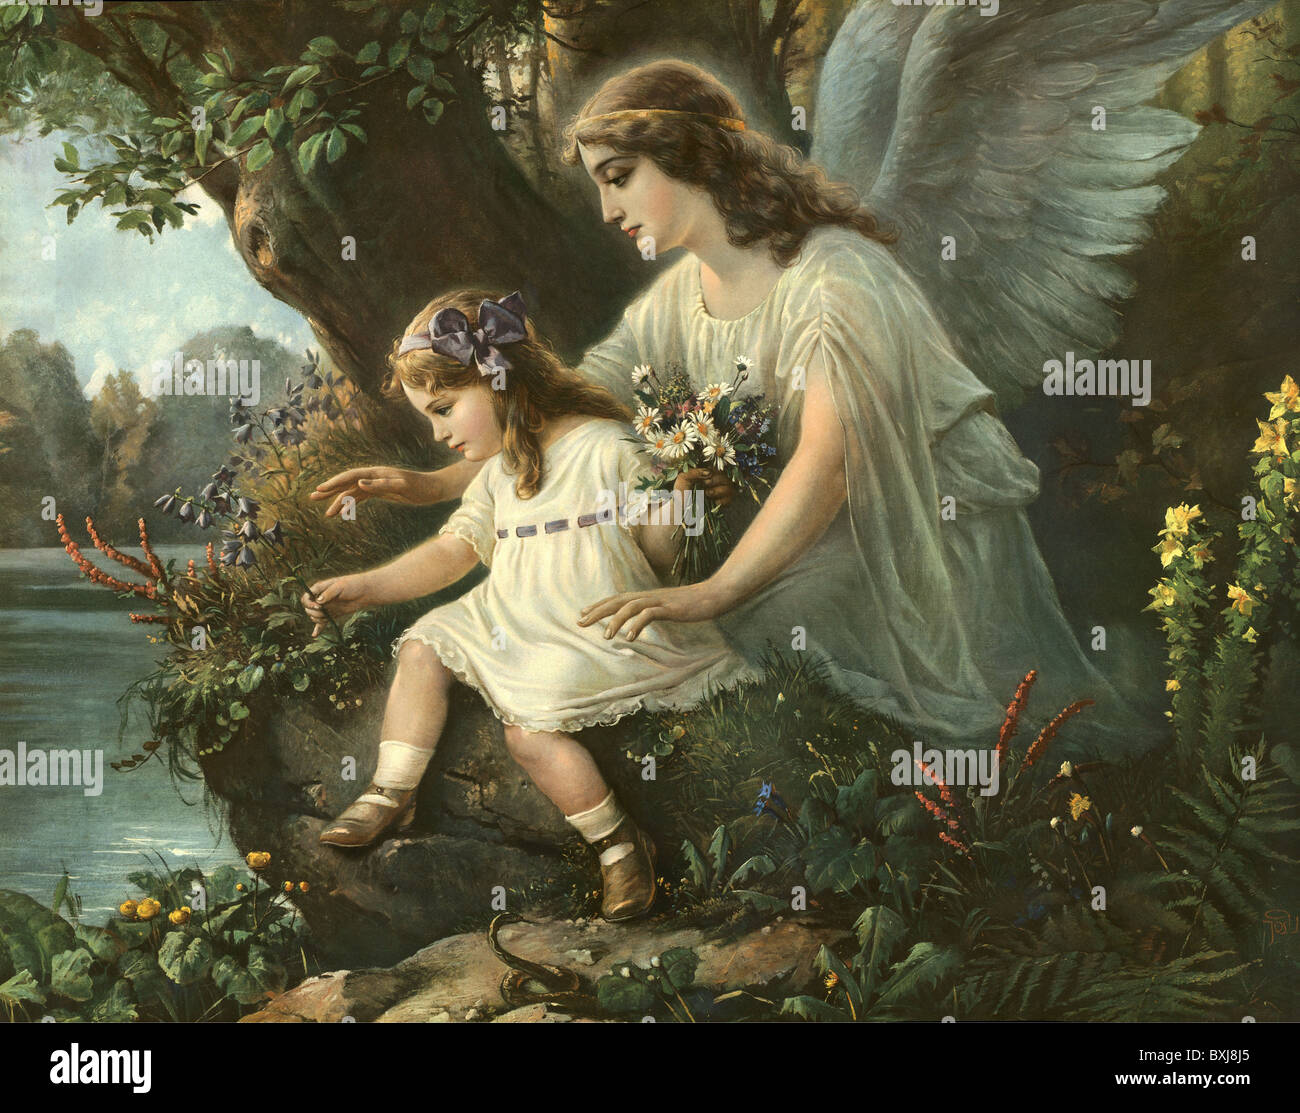 religion, Christianity, guardian angel protecting child, Germany, circa 1905, Additional-Rights-Clearences-Not Available Stock Photo